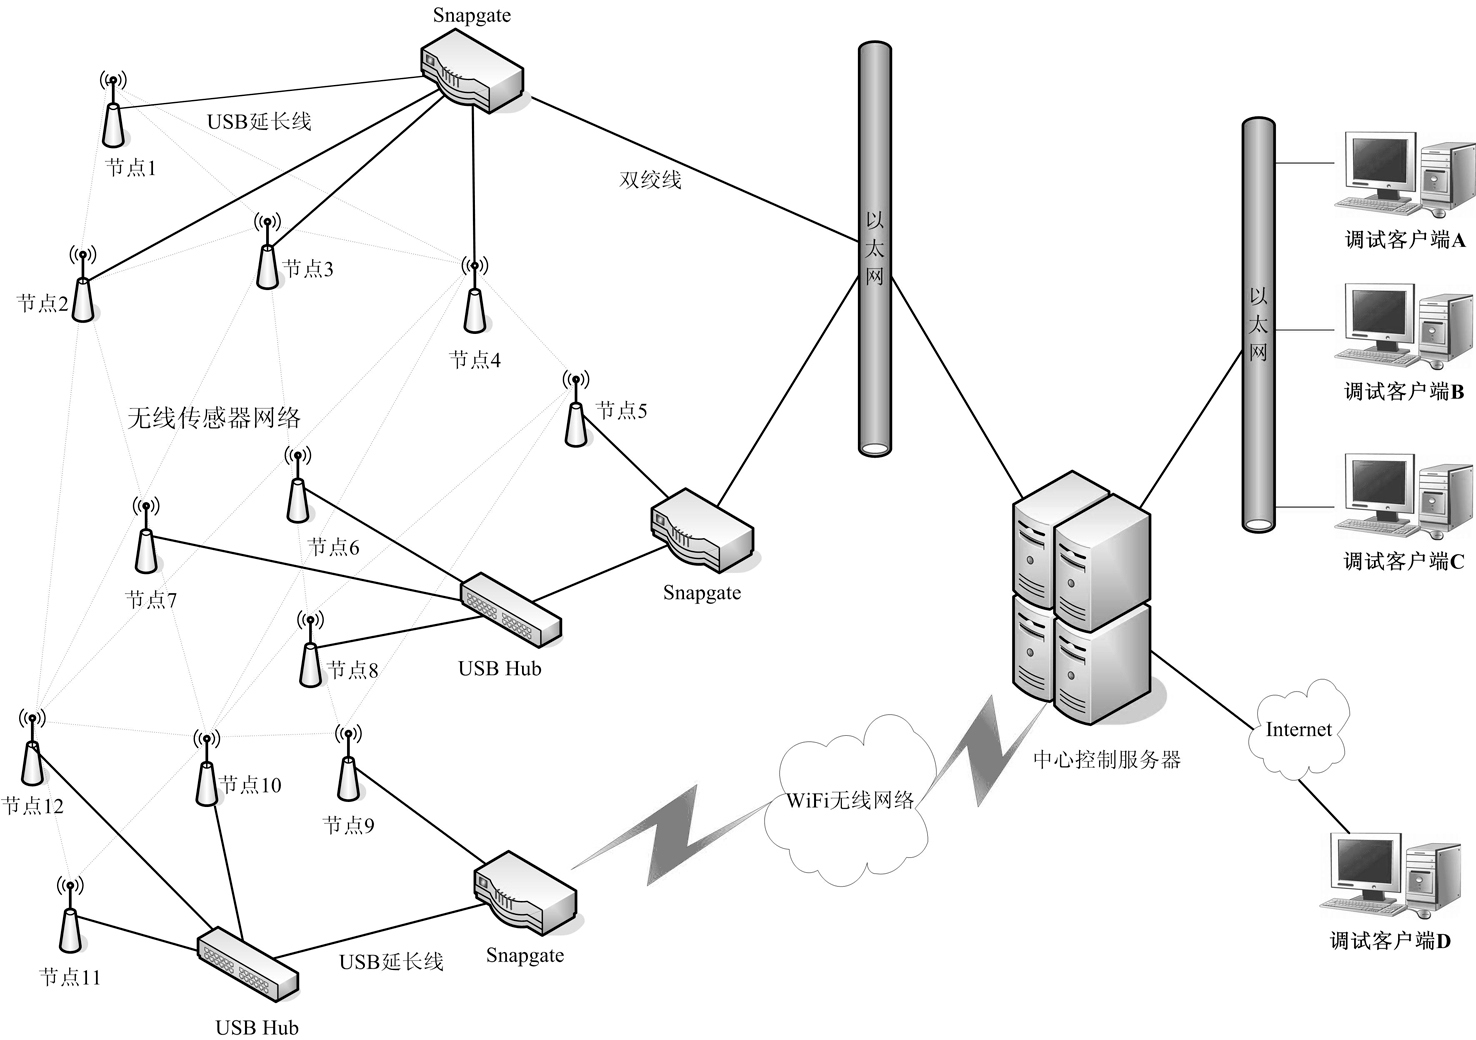 Distributed deployment method for large-scale wireless sensor network testing and debugging